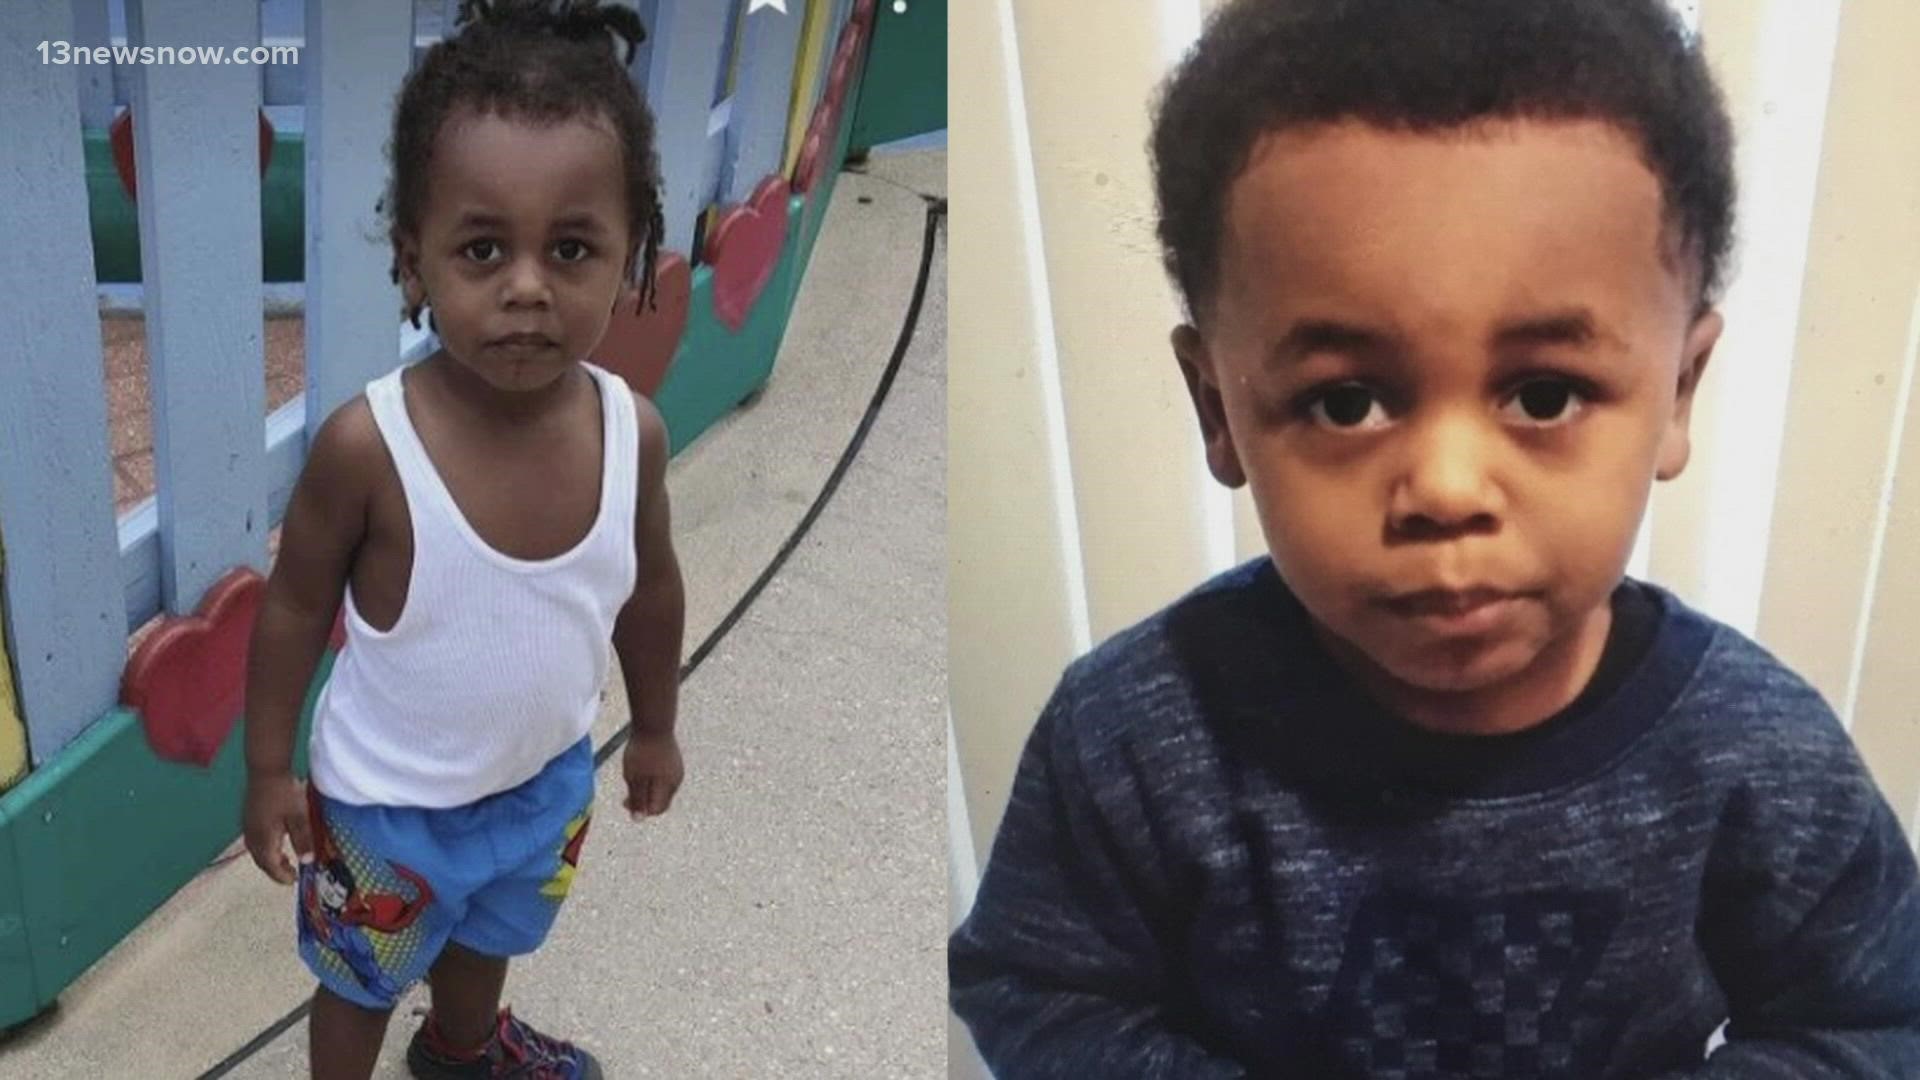 The urgent search for the 4-year-old Hampton boy is now getting help from the City of Suffolk.